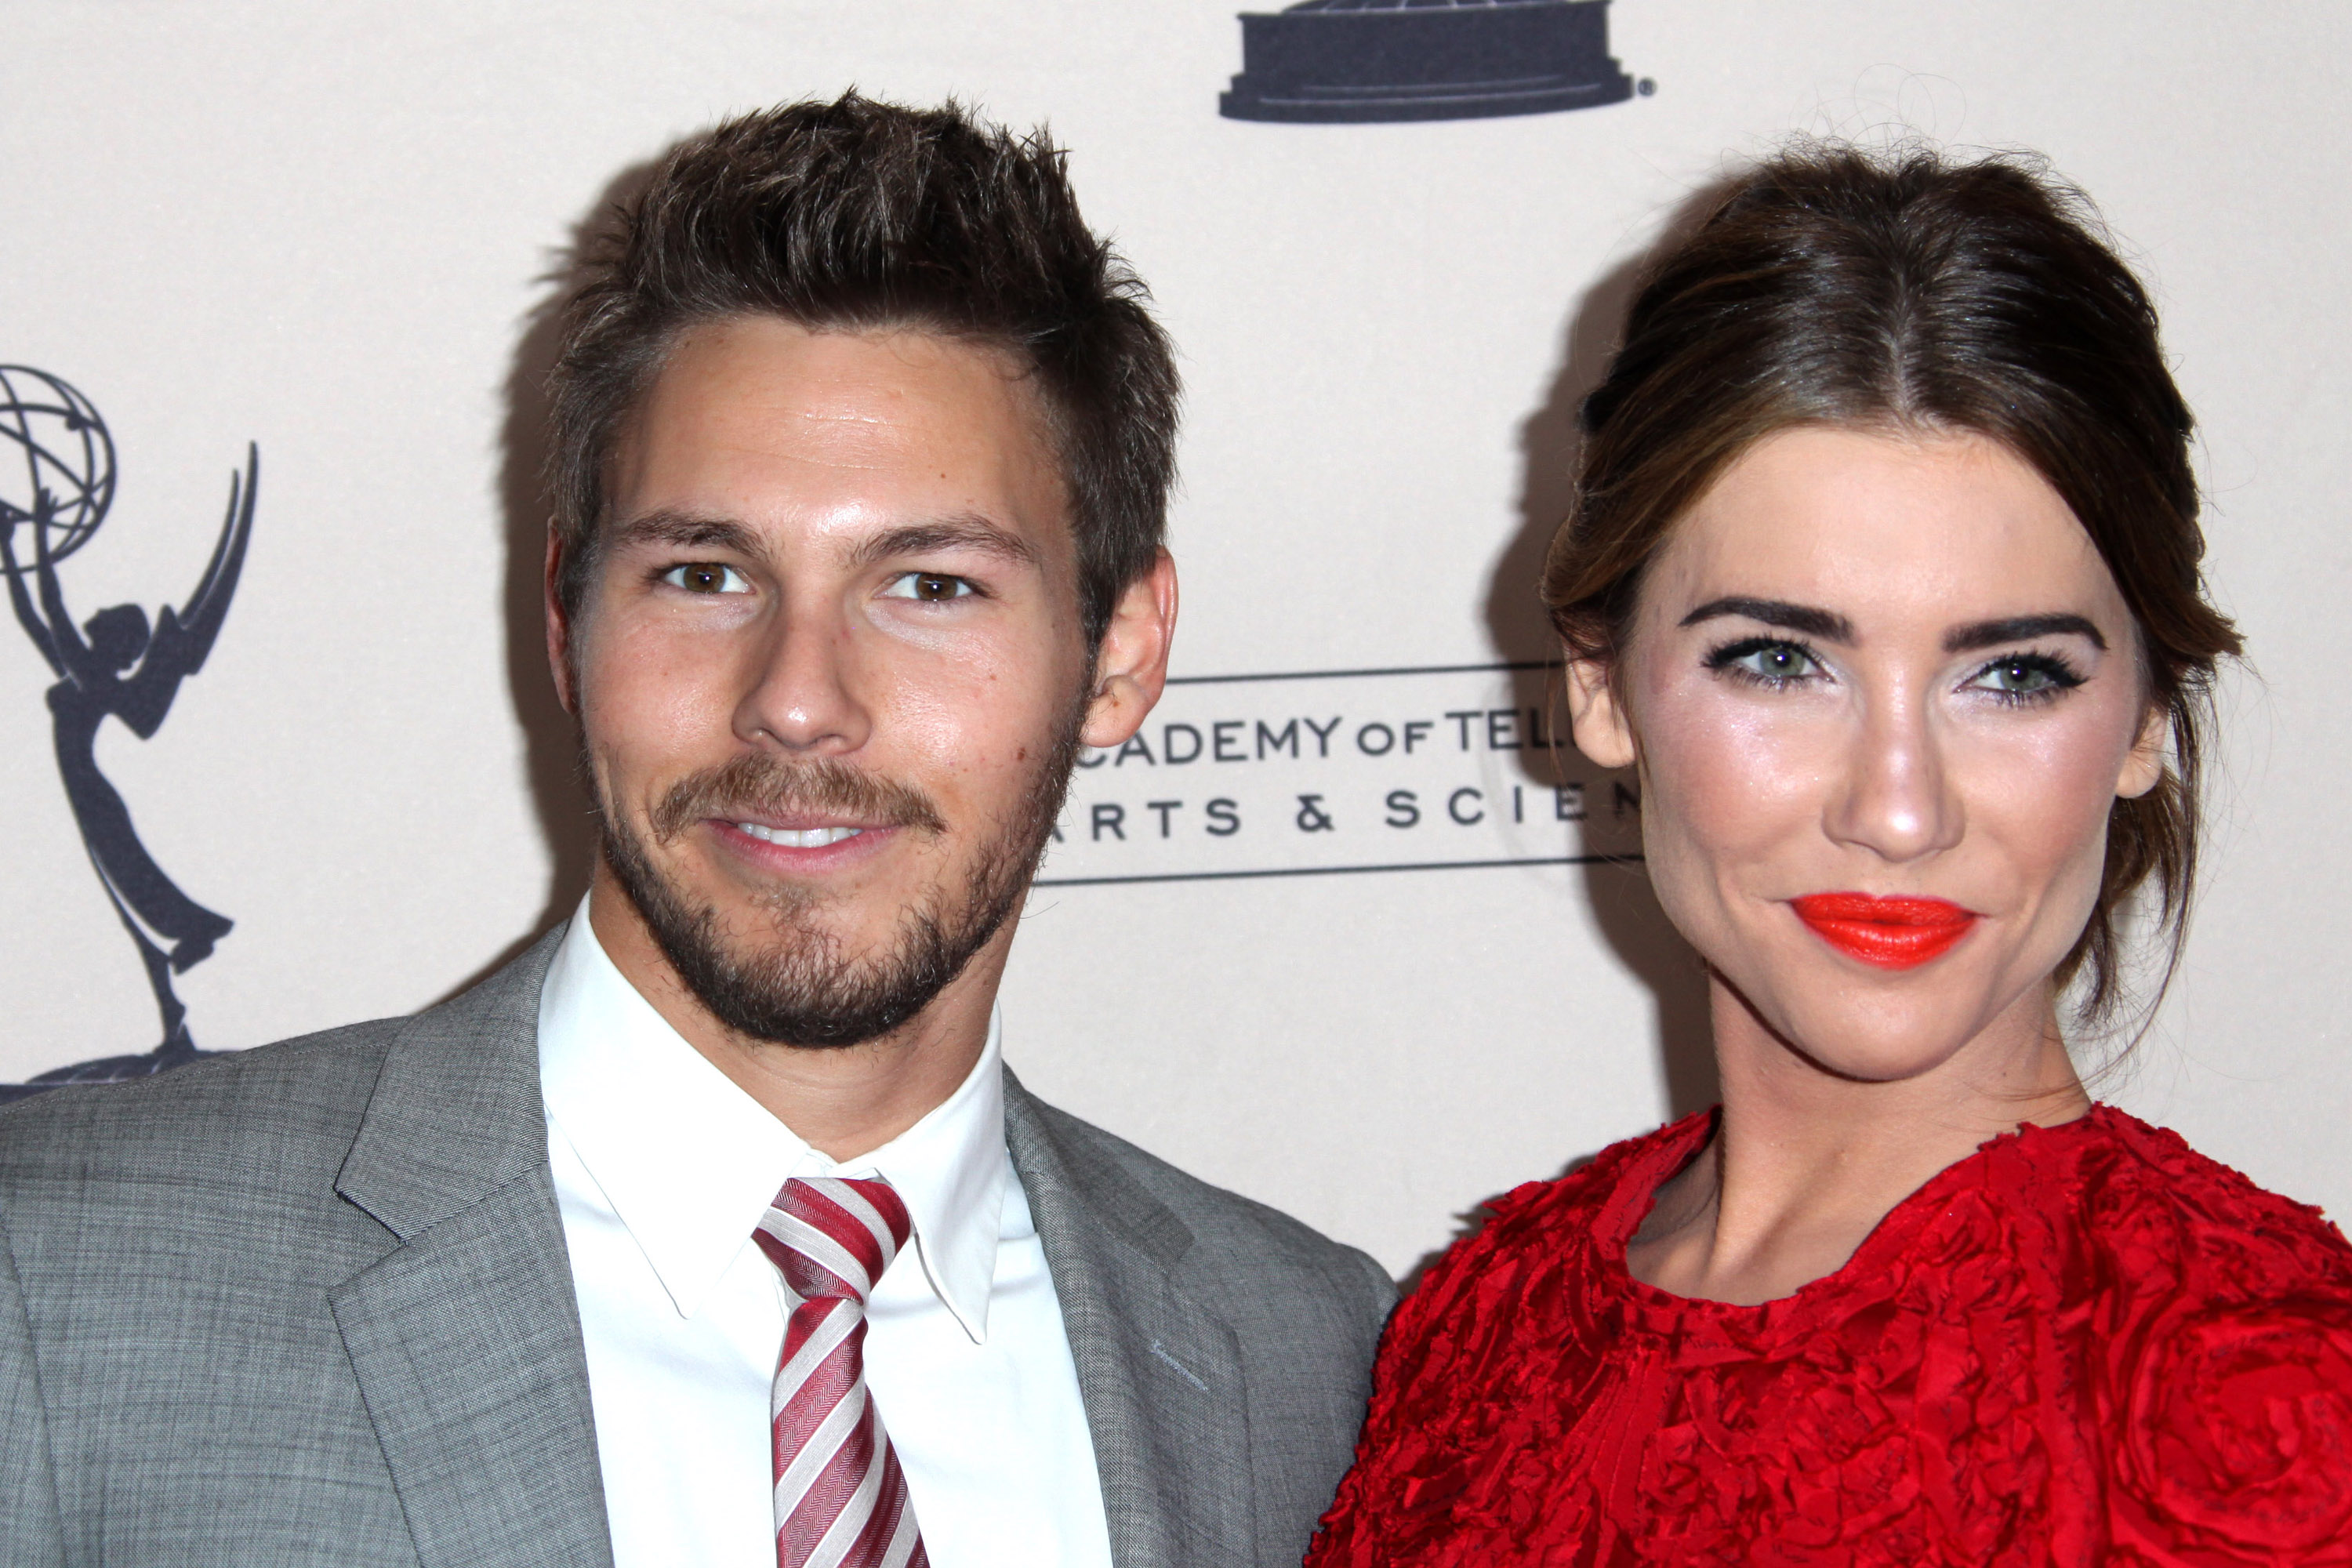 'The Bold and the Beautiful' actor Scott Clifton in a grey suit, and Jacqueline MacInnes Wood in a red dress; pose for a photo.